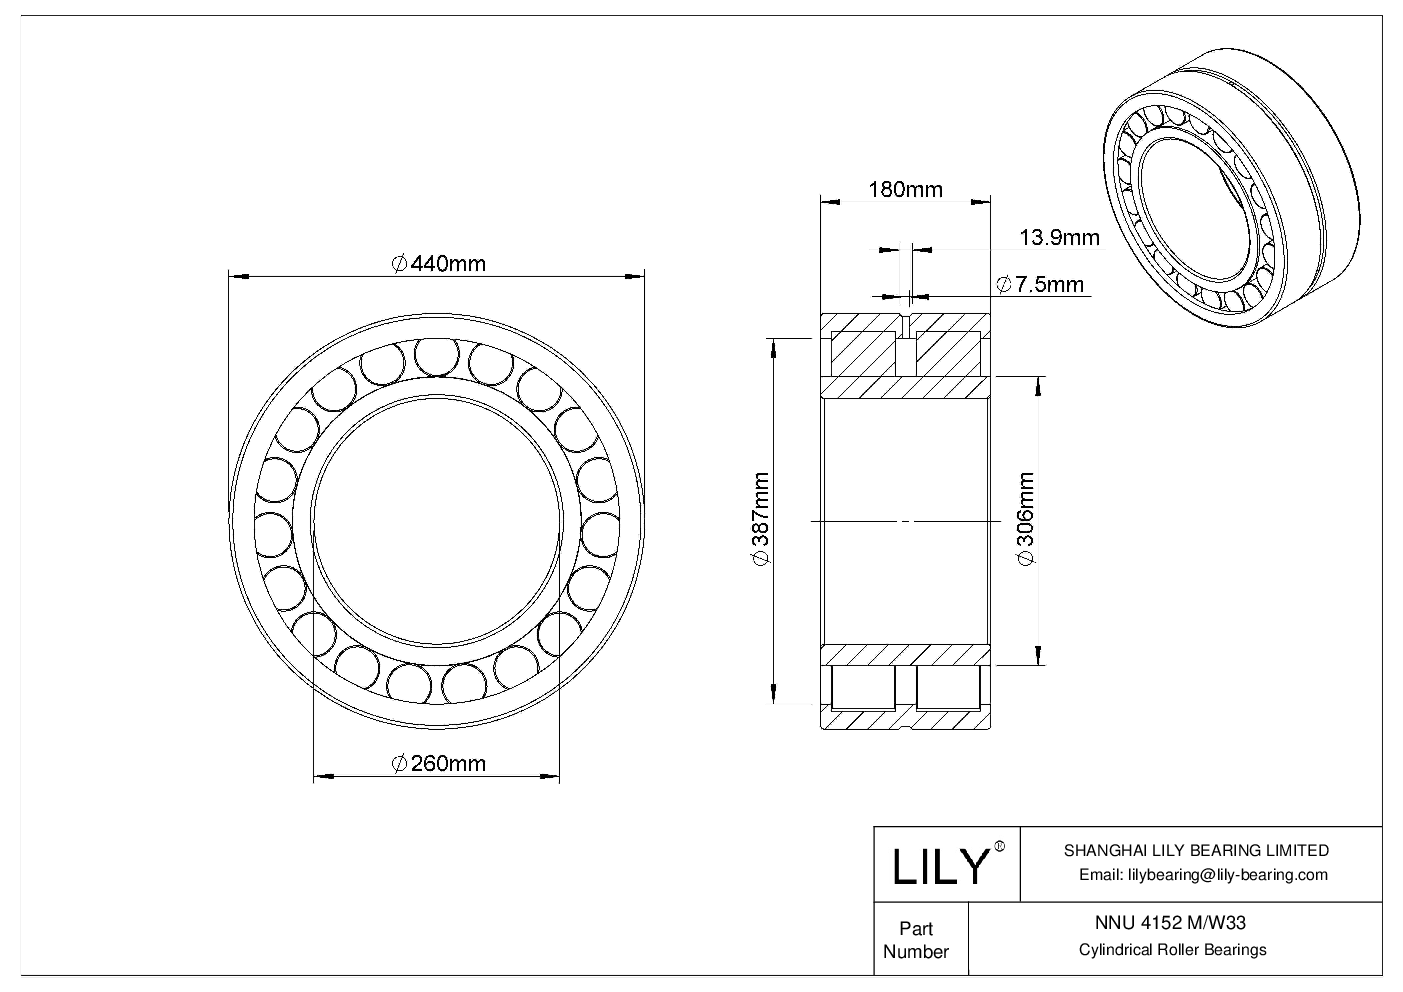 NNU 4152 M/W33 Double Row Cylindrical Roller Bearings cad drawing